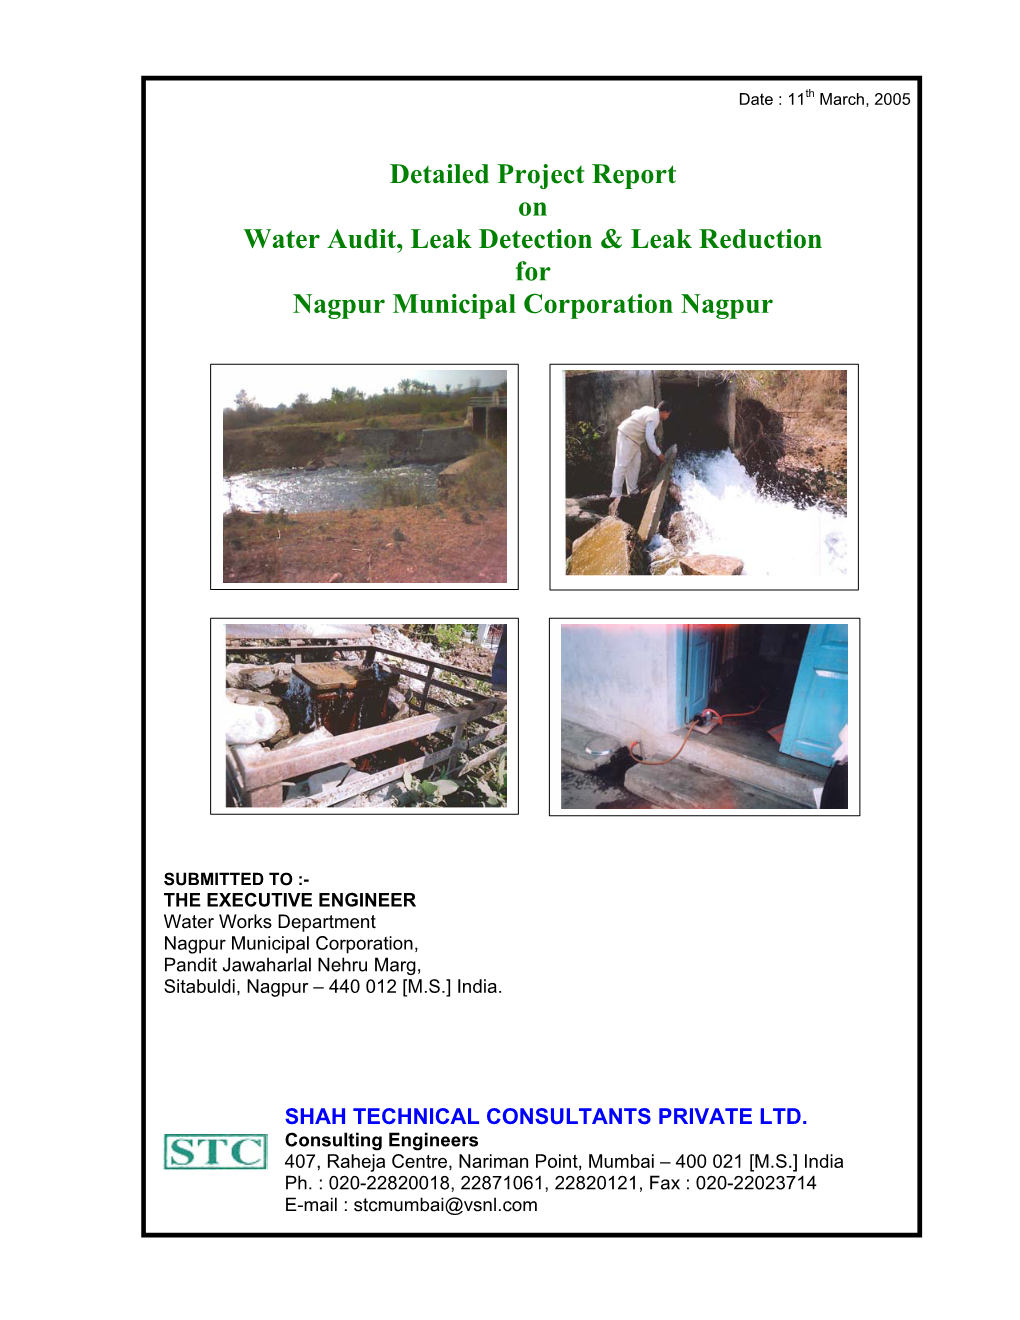 Detailed Project Report on Water Audit, Leak Detection & Leak